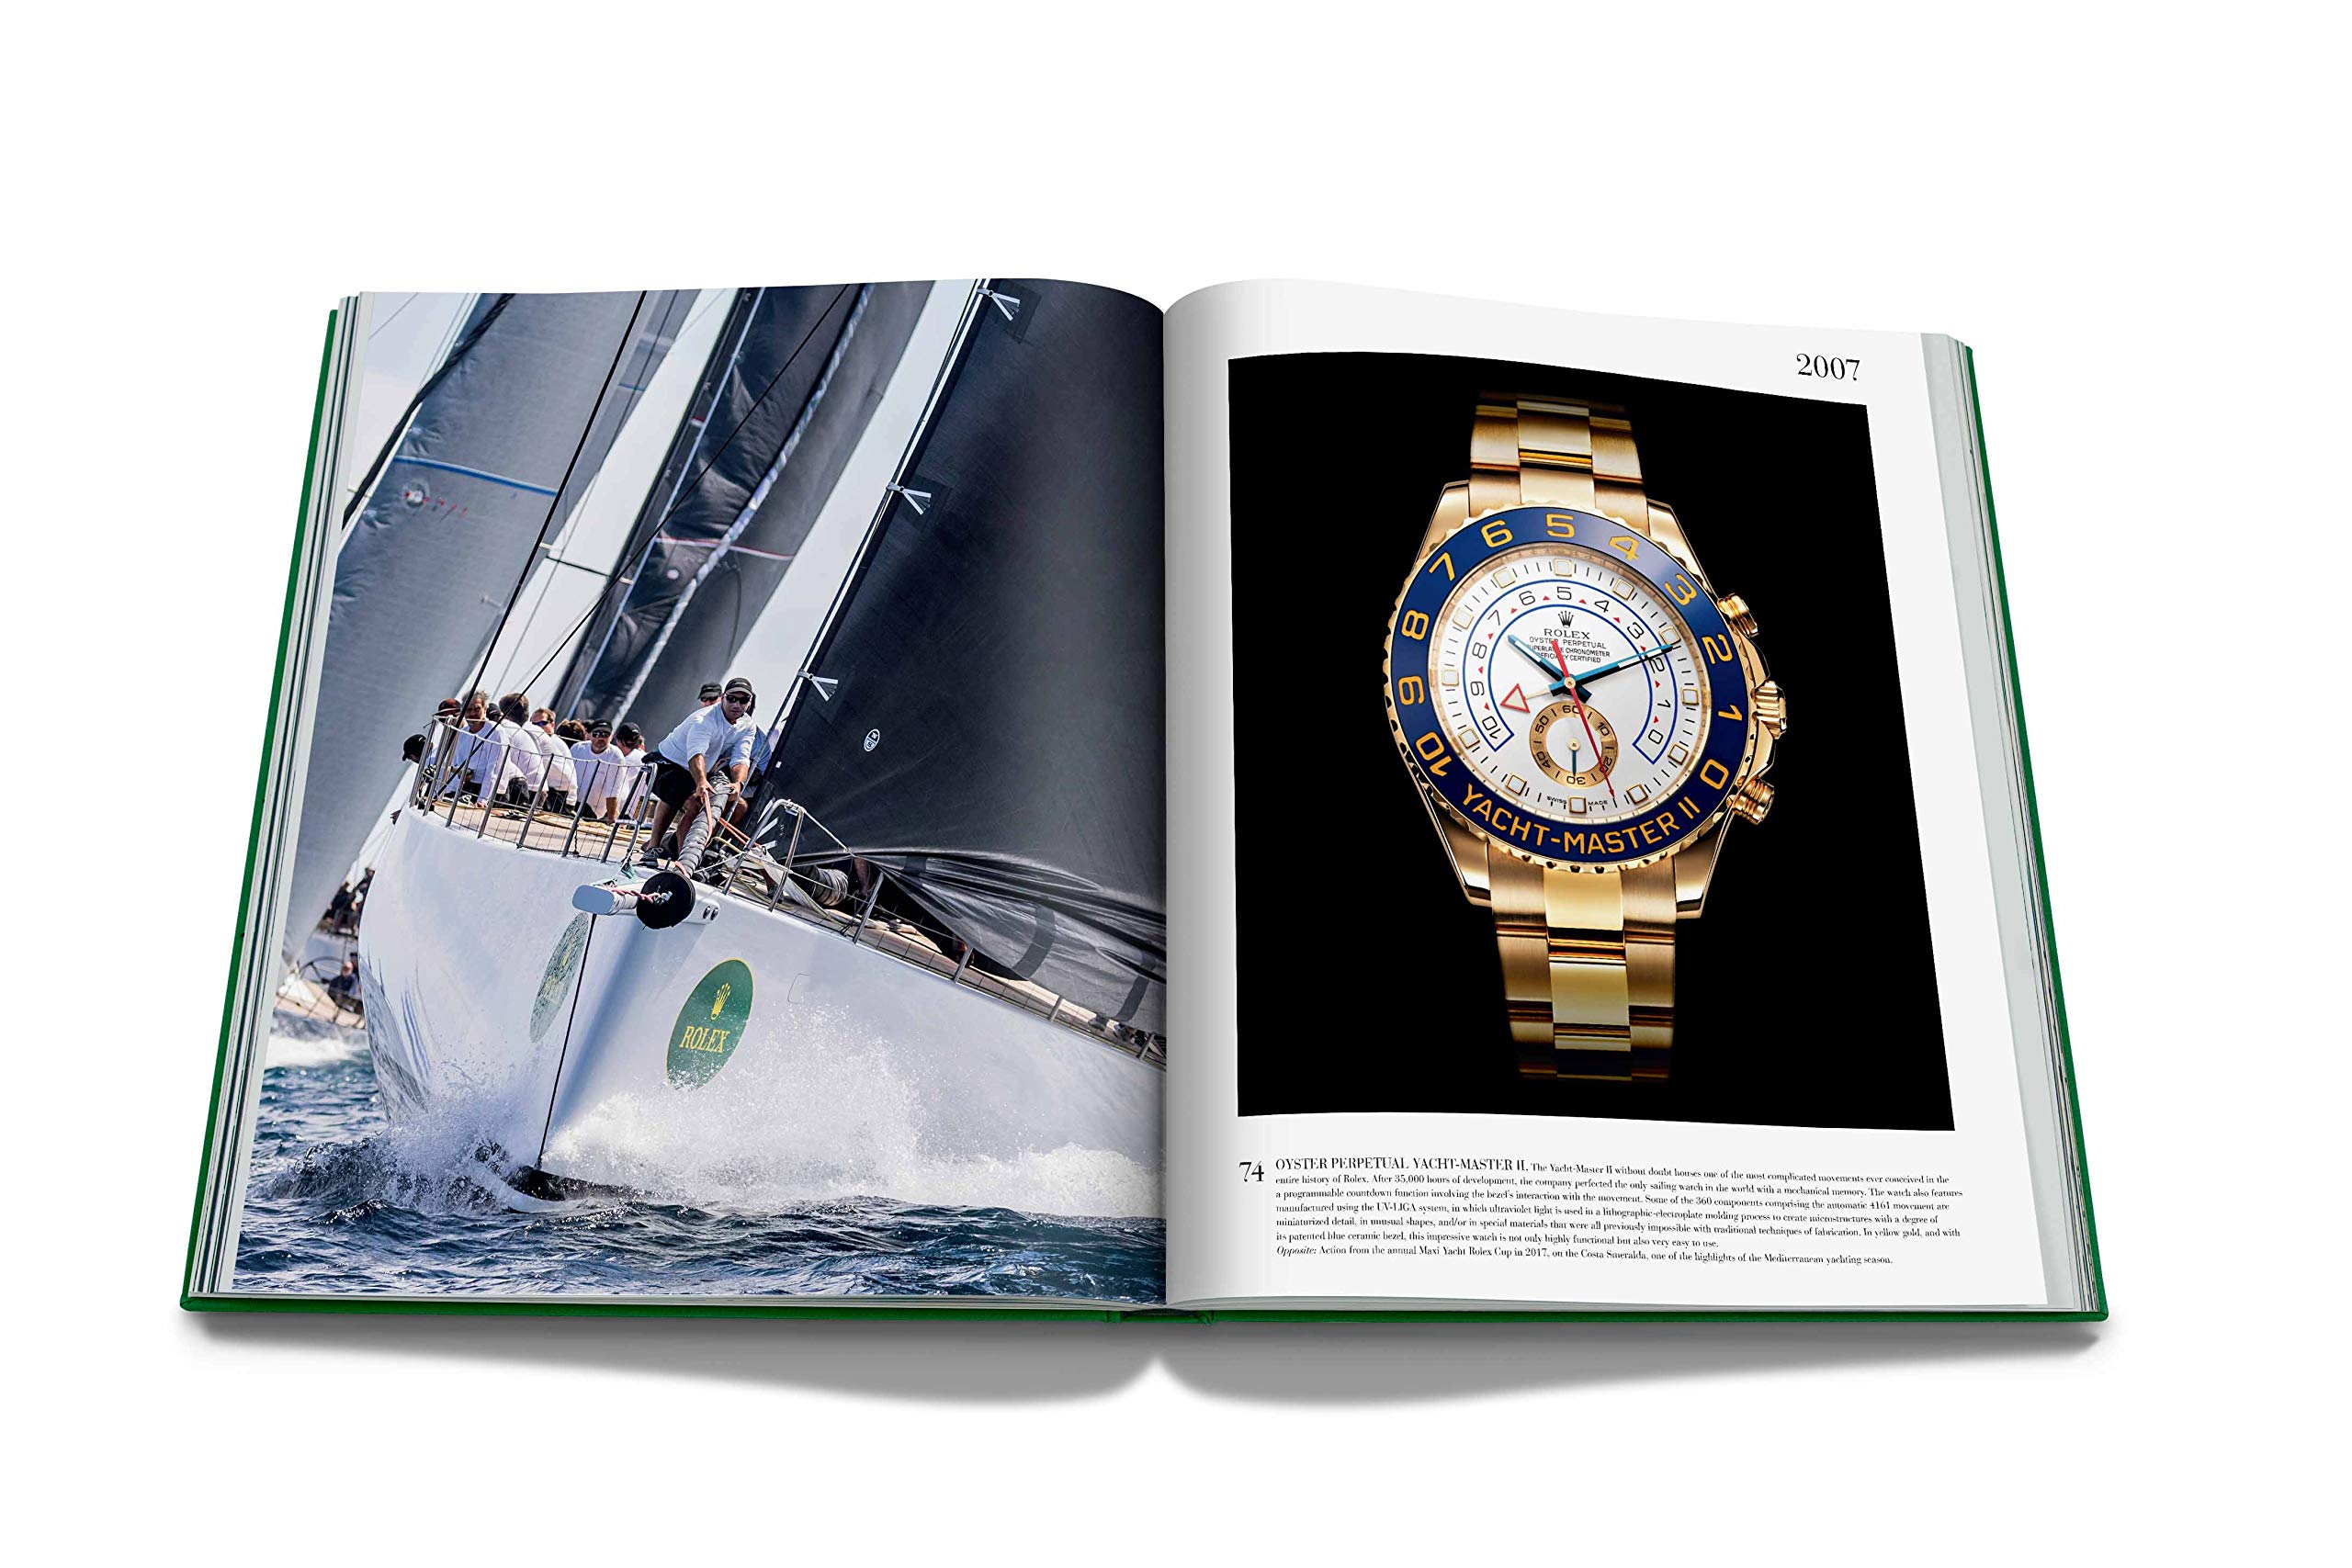 Assouline Rolex: The Impossible-collectie